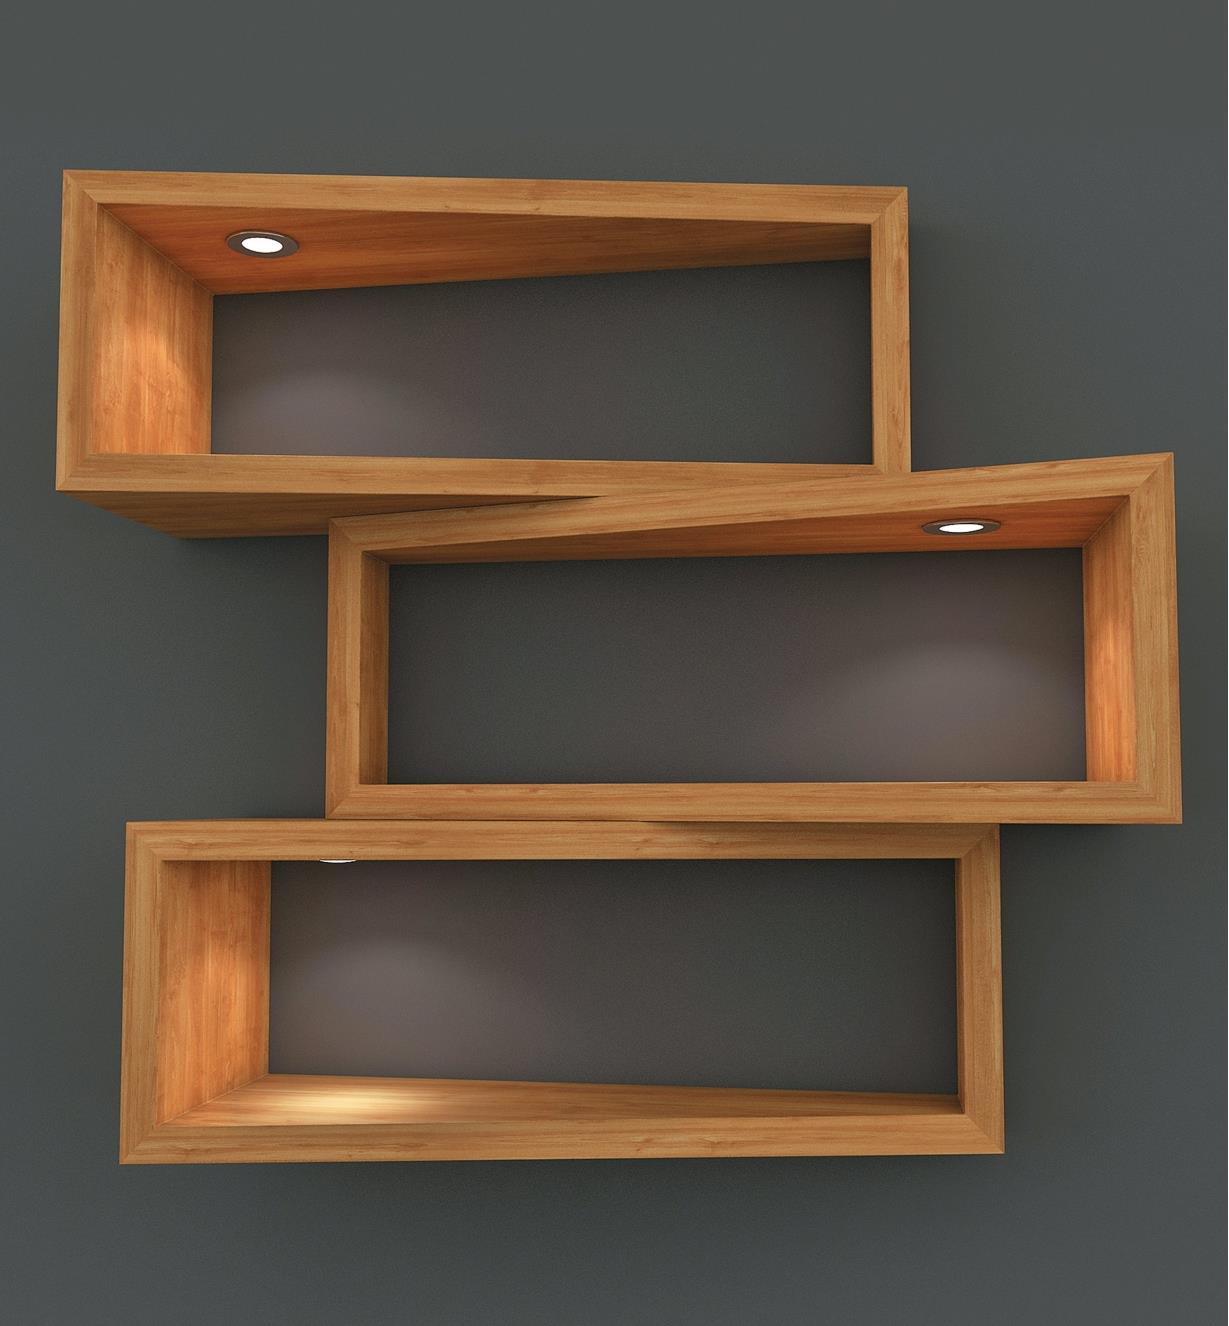 Example of Mini Recessed LED Lights installed in floating shelves